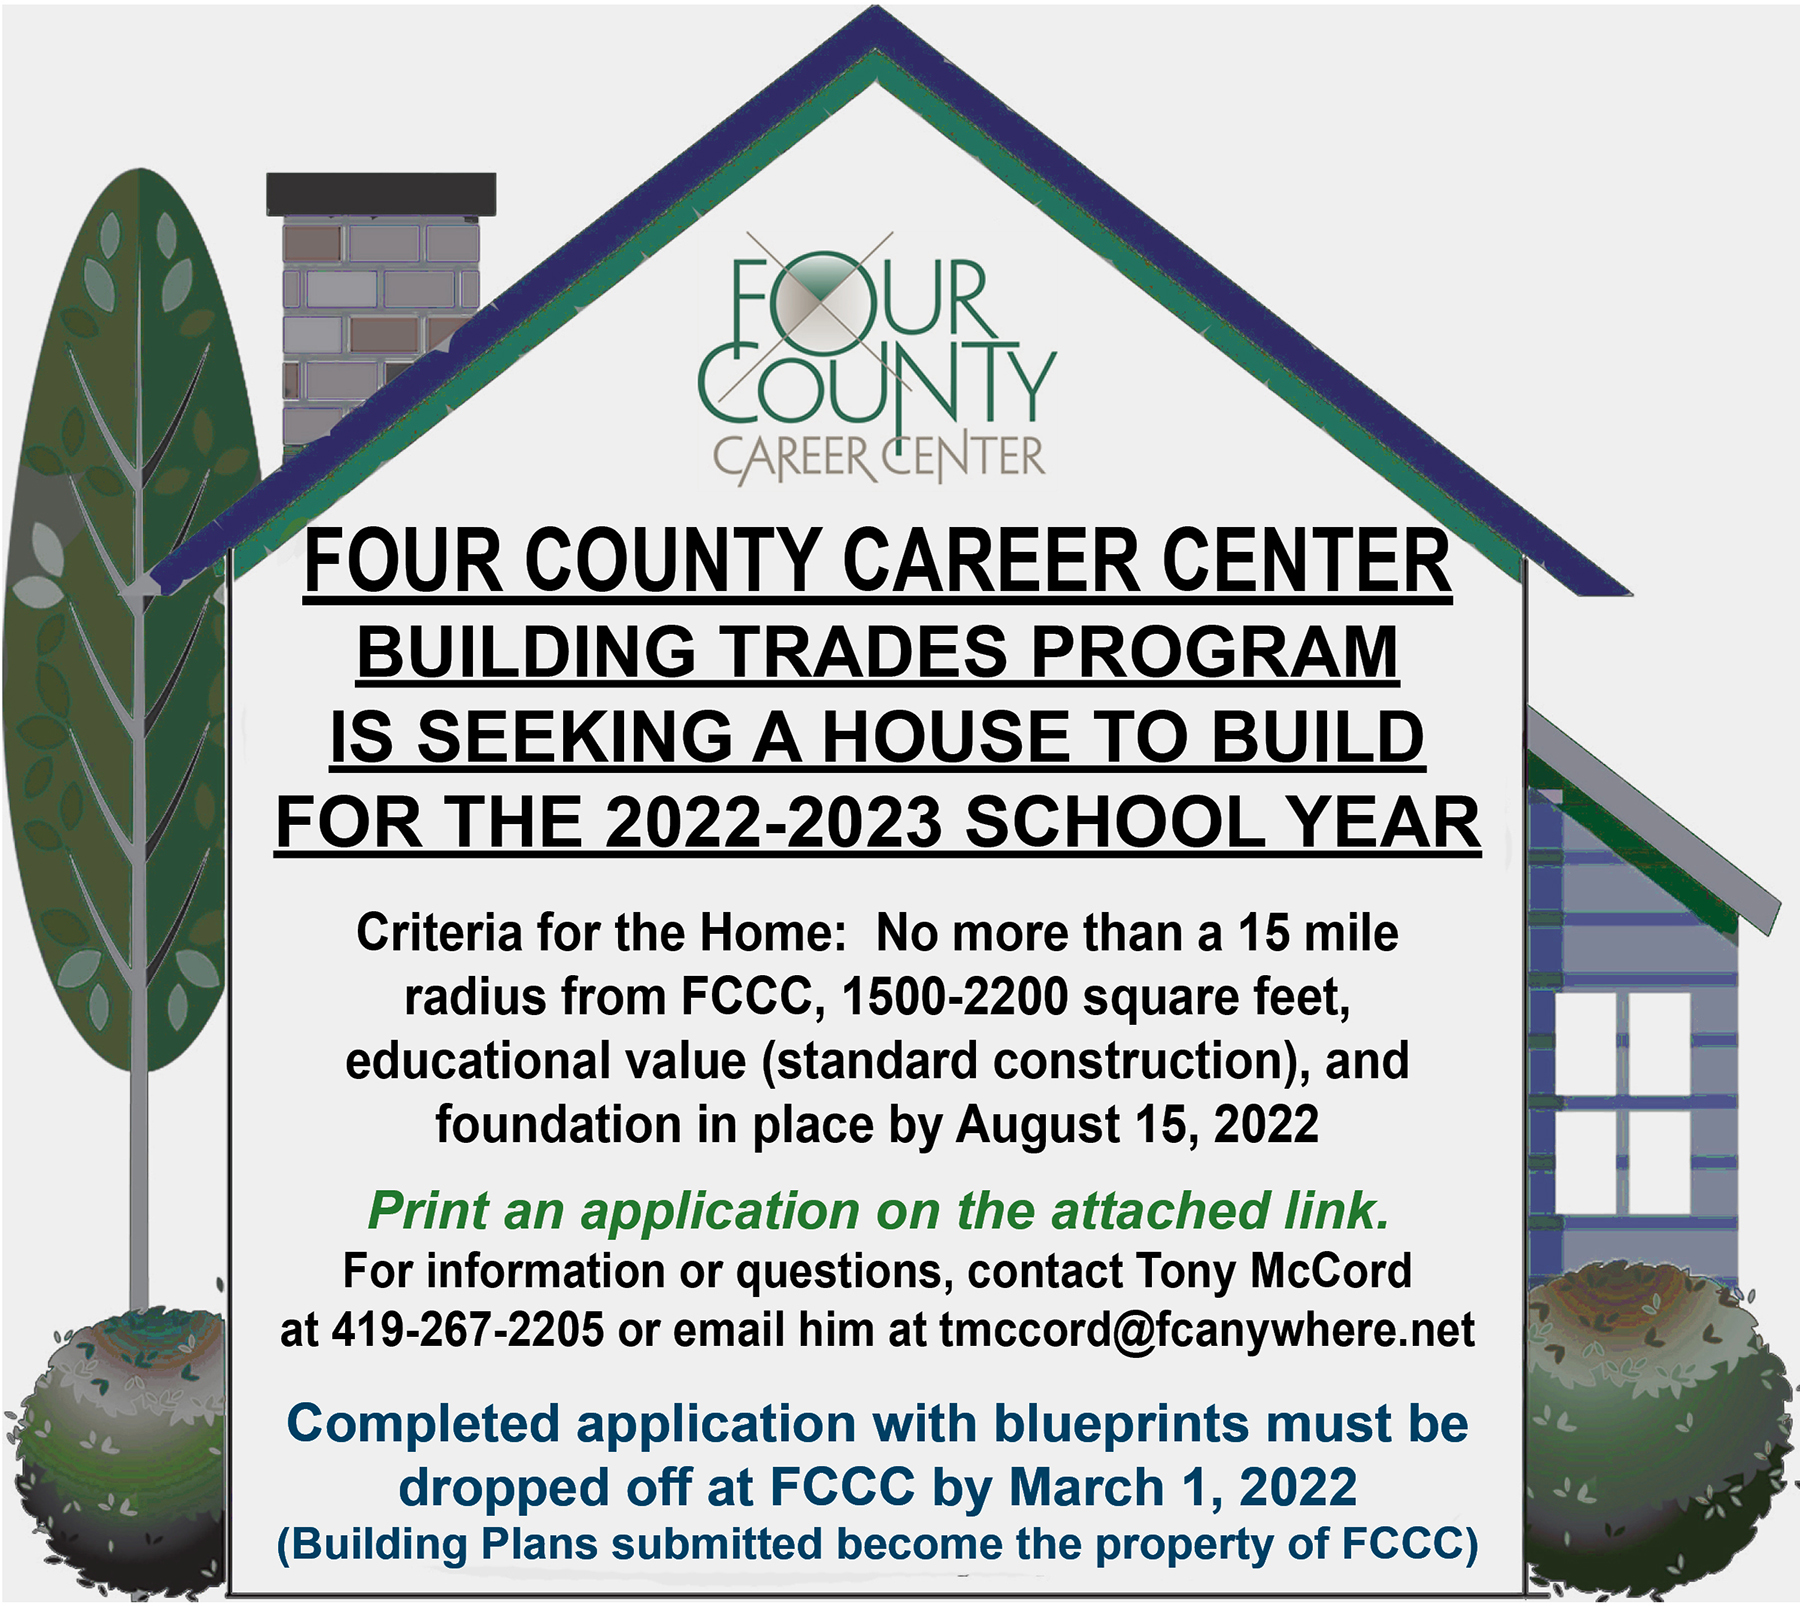 Four County Career Center News Article